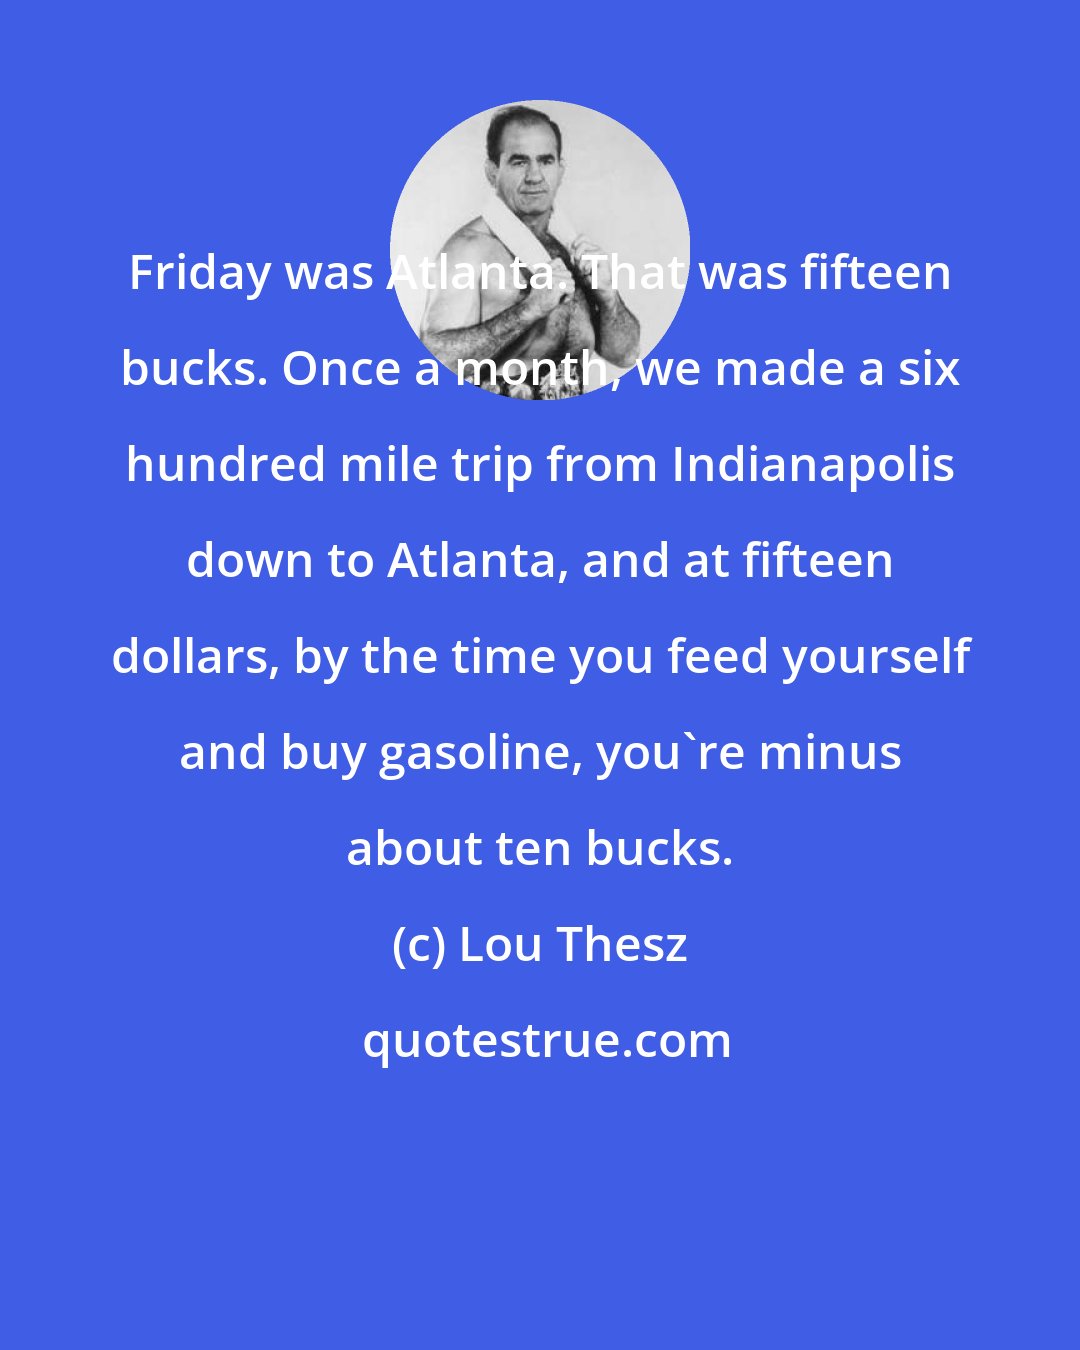 Lou Thesz: Friday was Atlanta. That was fifteen bucks. Once a month, we made a six hundred mile trip from Indianapolis down to Atlanta, and at fifteen dollars, by the time you feed yourself and buy gasoline, you're minus about ten bucks.